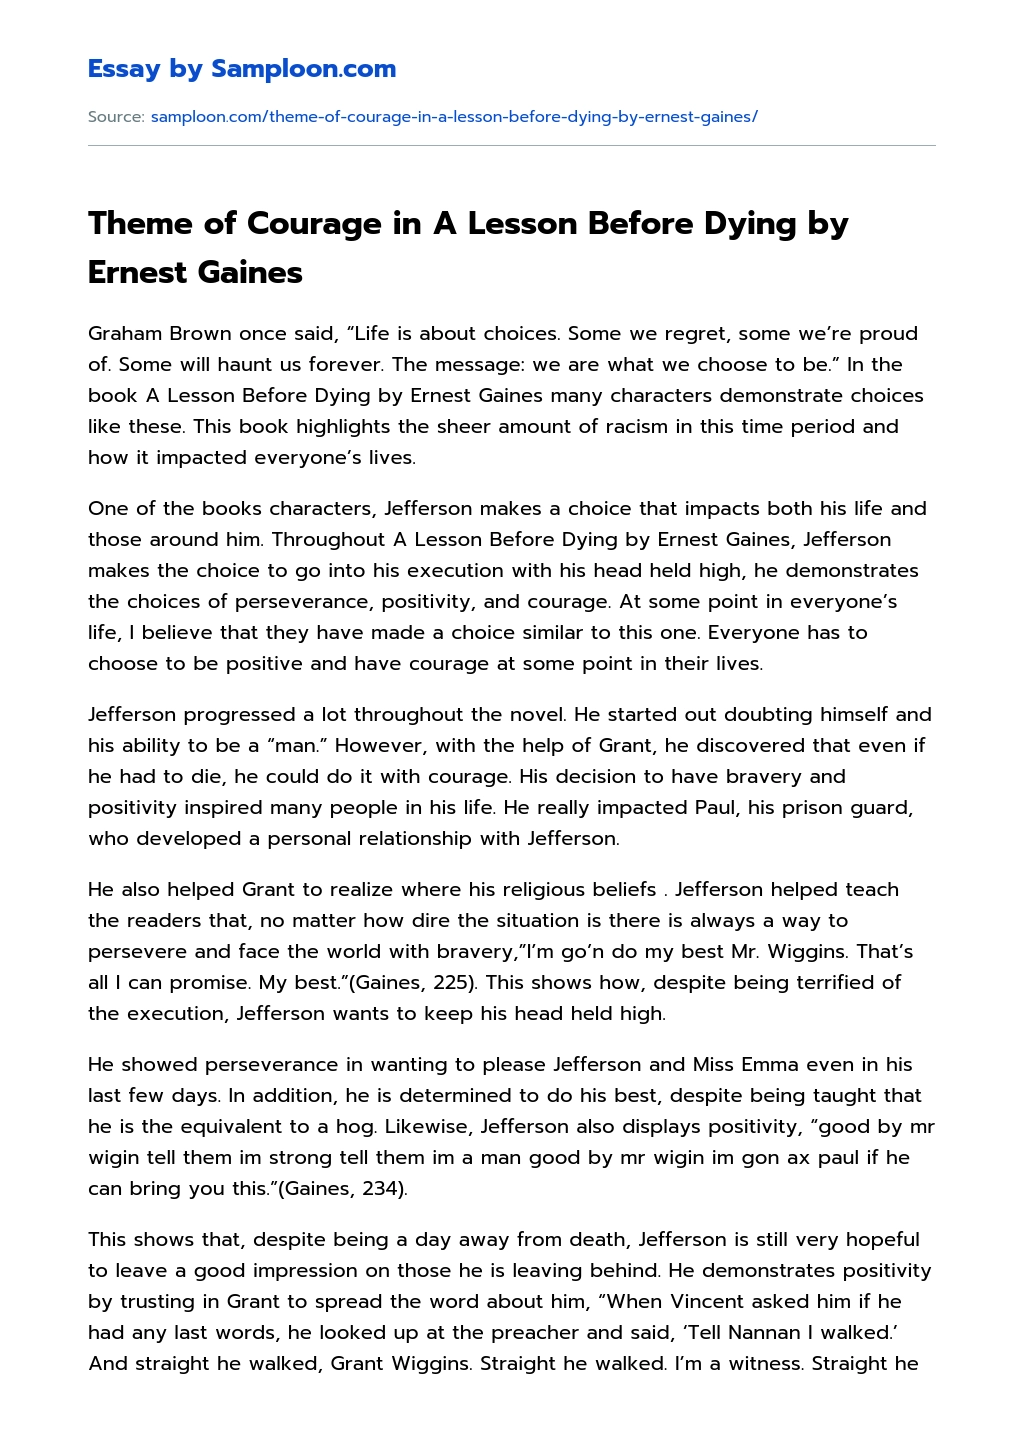 Theme of Courage in A Lesson Before Dying by Ernest Gaines essay